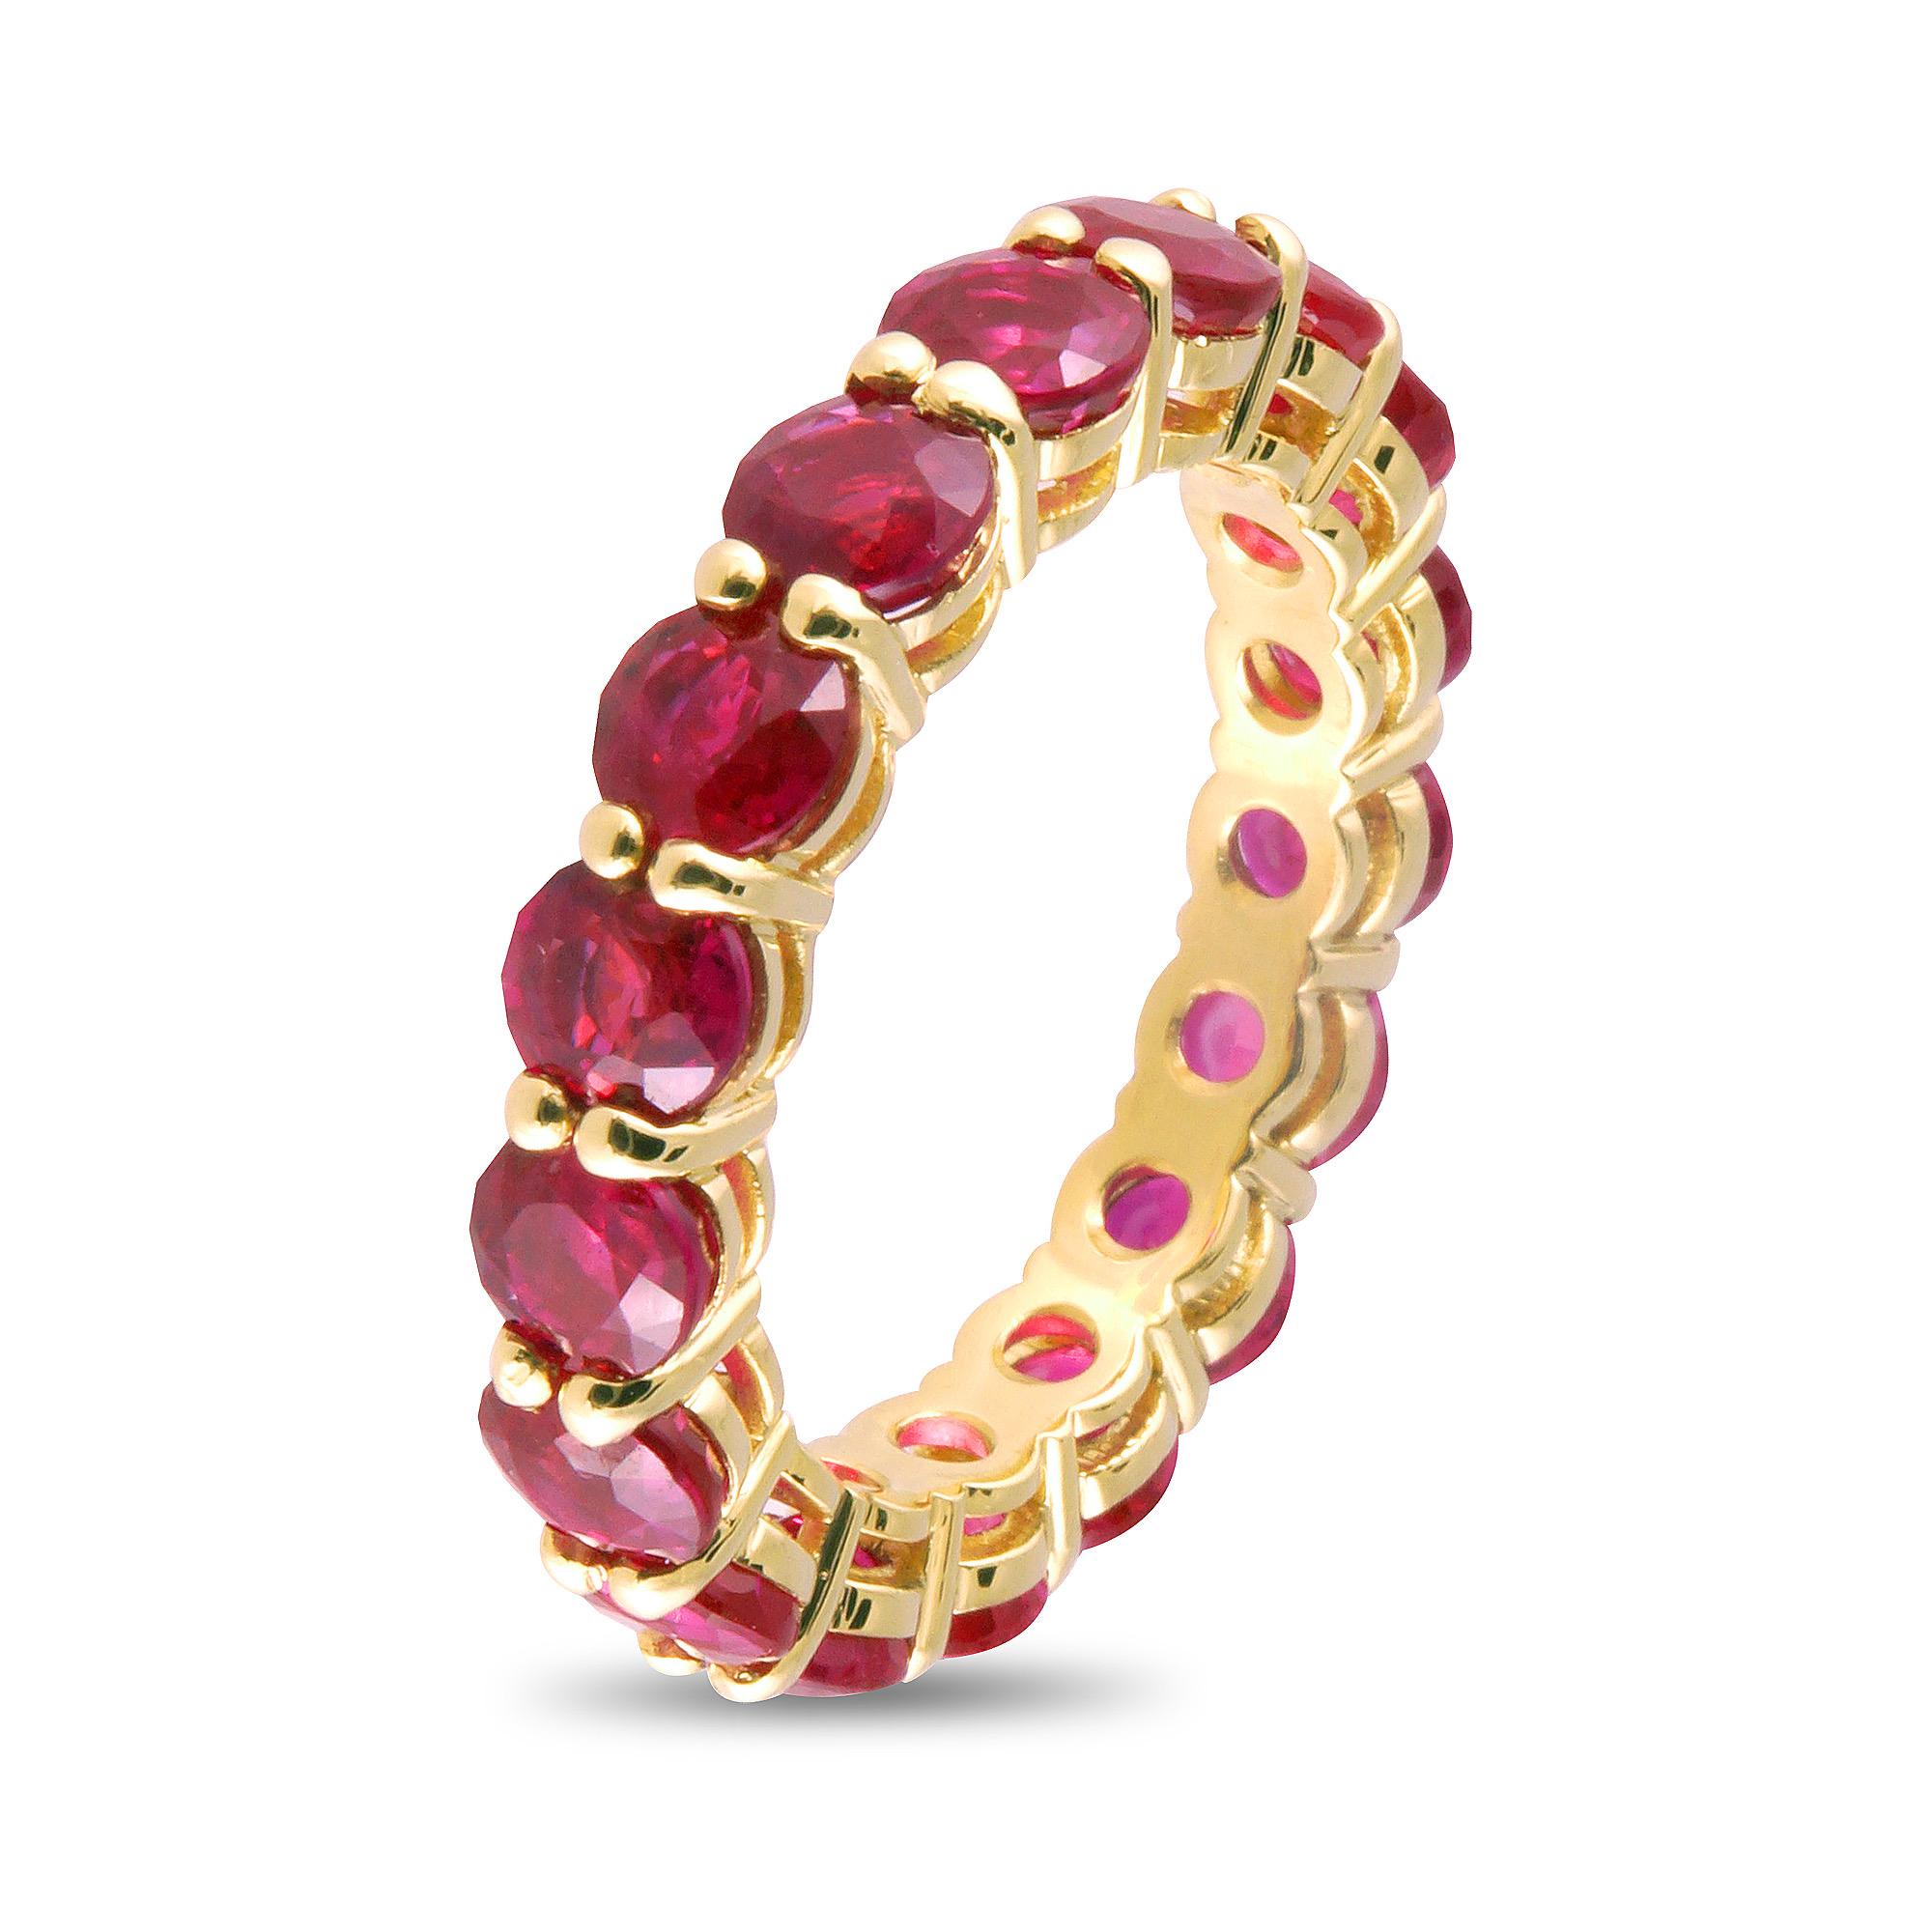 With rubies being one of the most popular and traditional jewelry gems, this 6.14 carat ruby eternity band is the perfect addition to give any ring stack a pop of color. Ideal gift to give to your significant other as a push present, Valentine’s Day